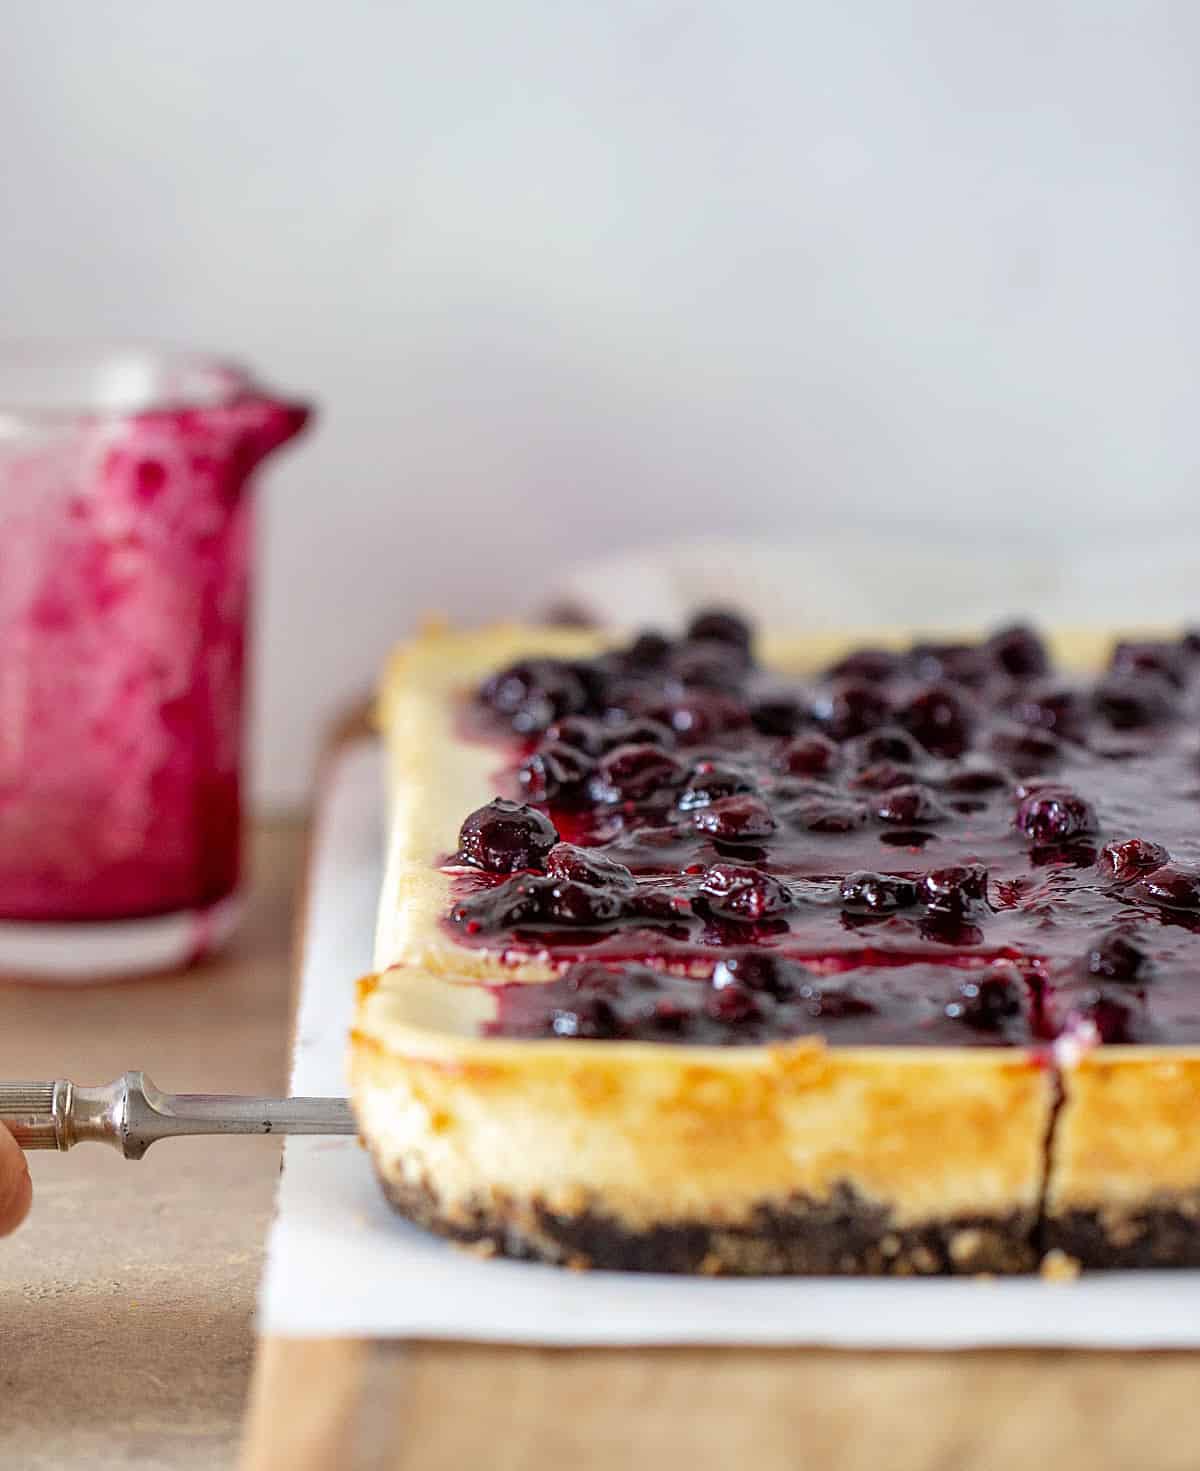 Berry topped cheesecake on wooden board, sauce jar